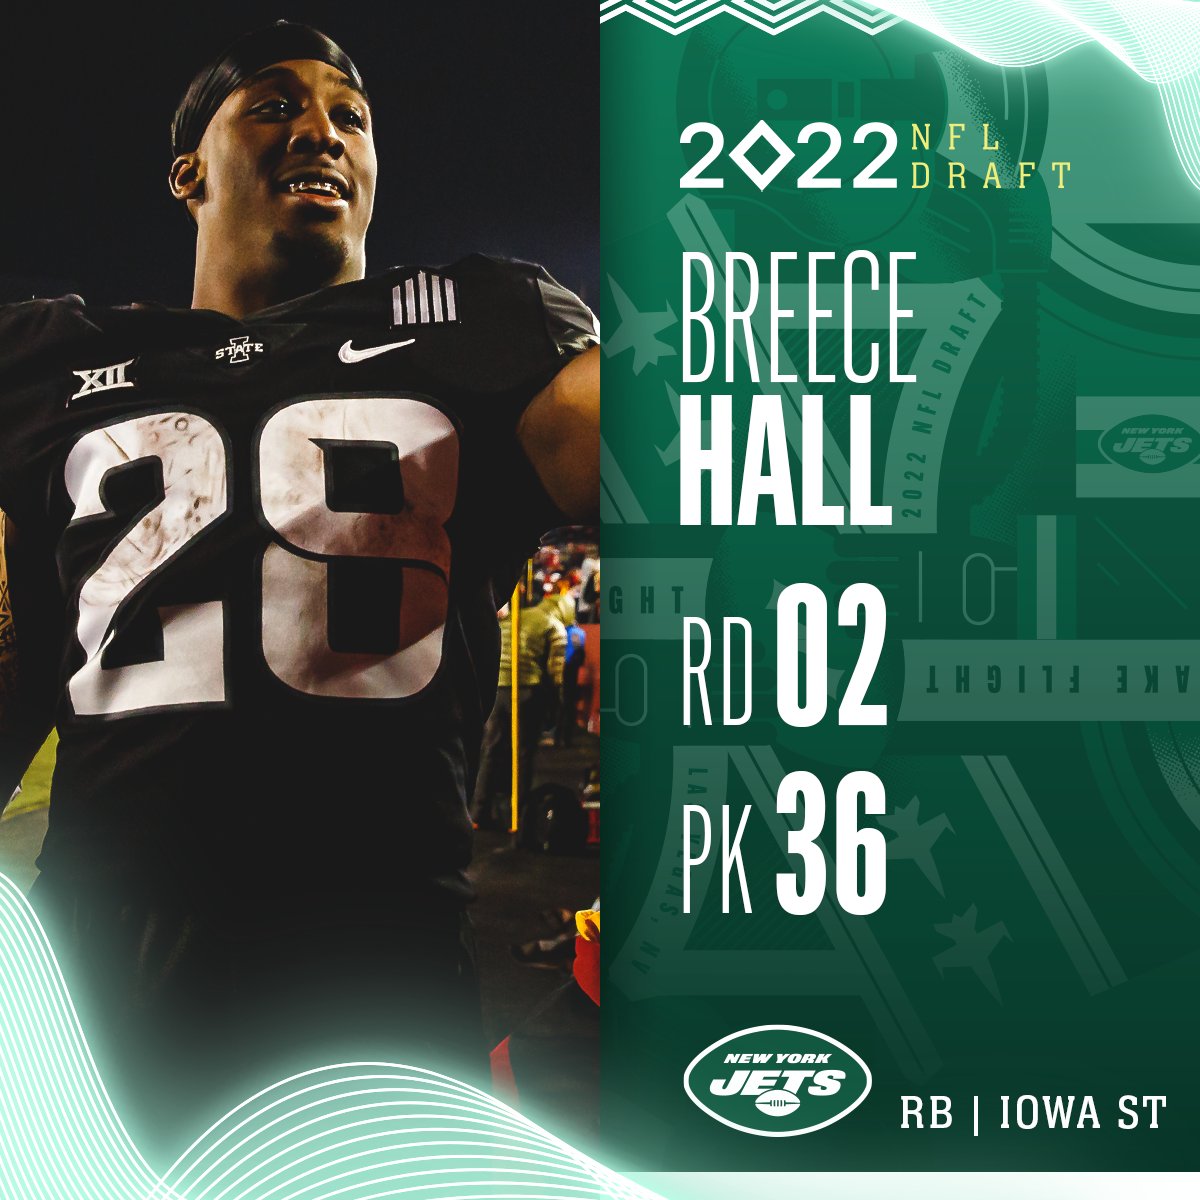 Jake Hummel on Twitter: 'RT @NFL: With the No. 36 overall pick in the 2022 @ NFLDraft, the @nyjets select Breece Hall! 